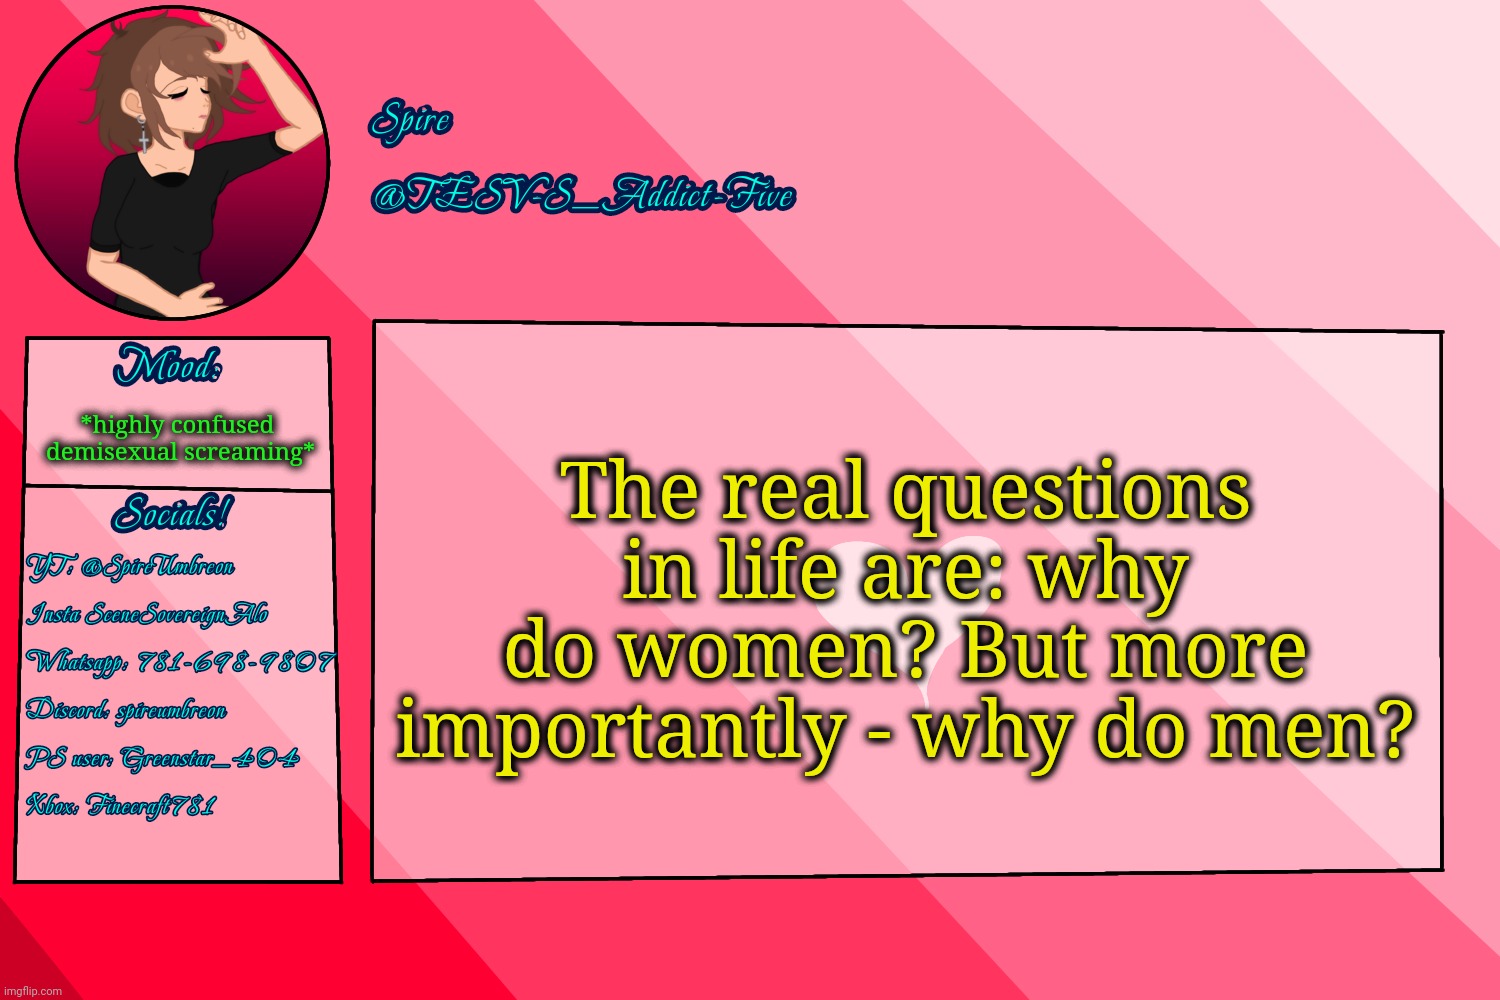 Lifes very pressing questions. | The real questions in life are: why do women? But more importantly - why do men? *highly confused 
demisexual screaming* | image tagged in tesv-s_addict-five announcement template | made w/ Imgflip meme maker